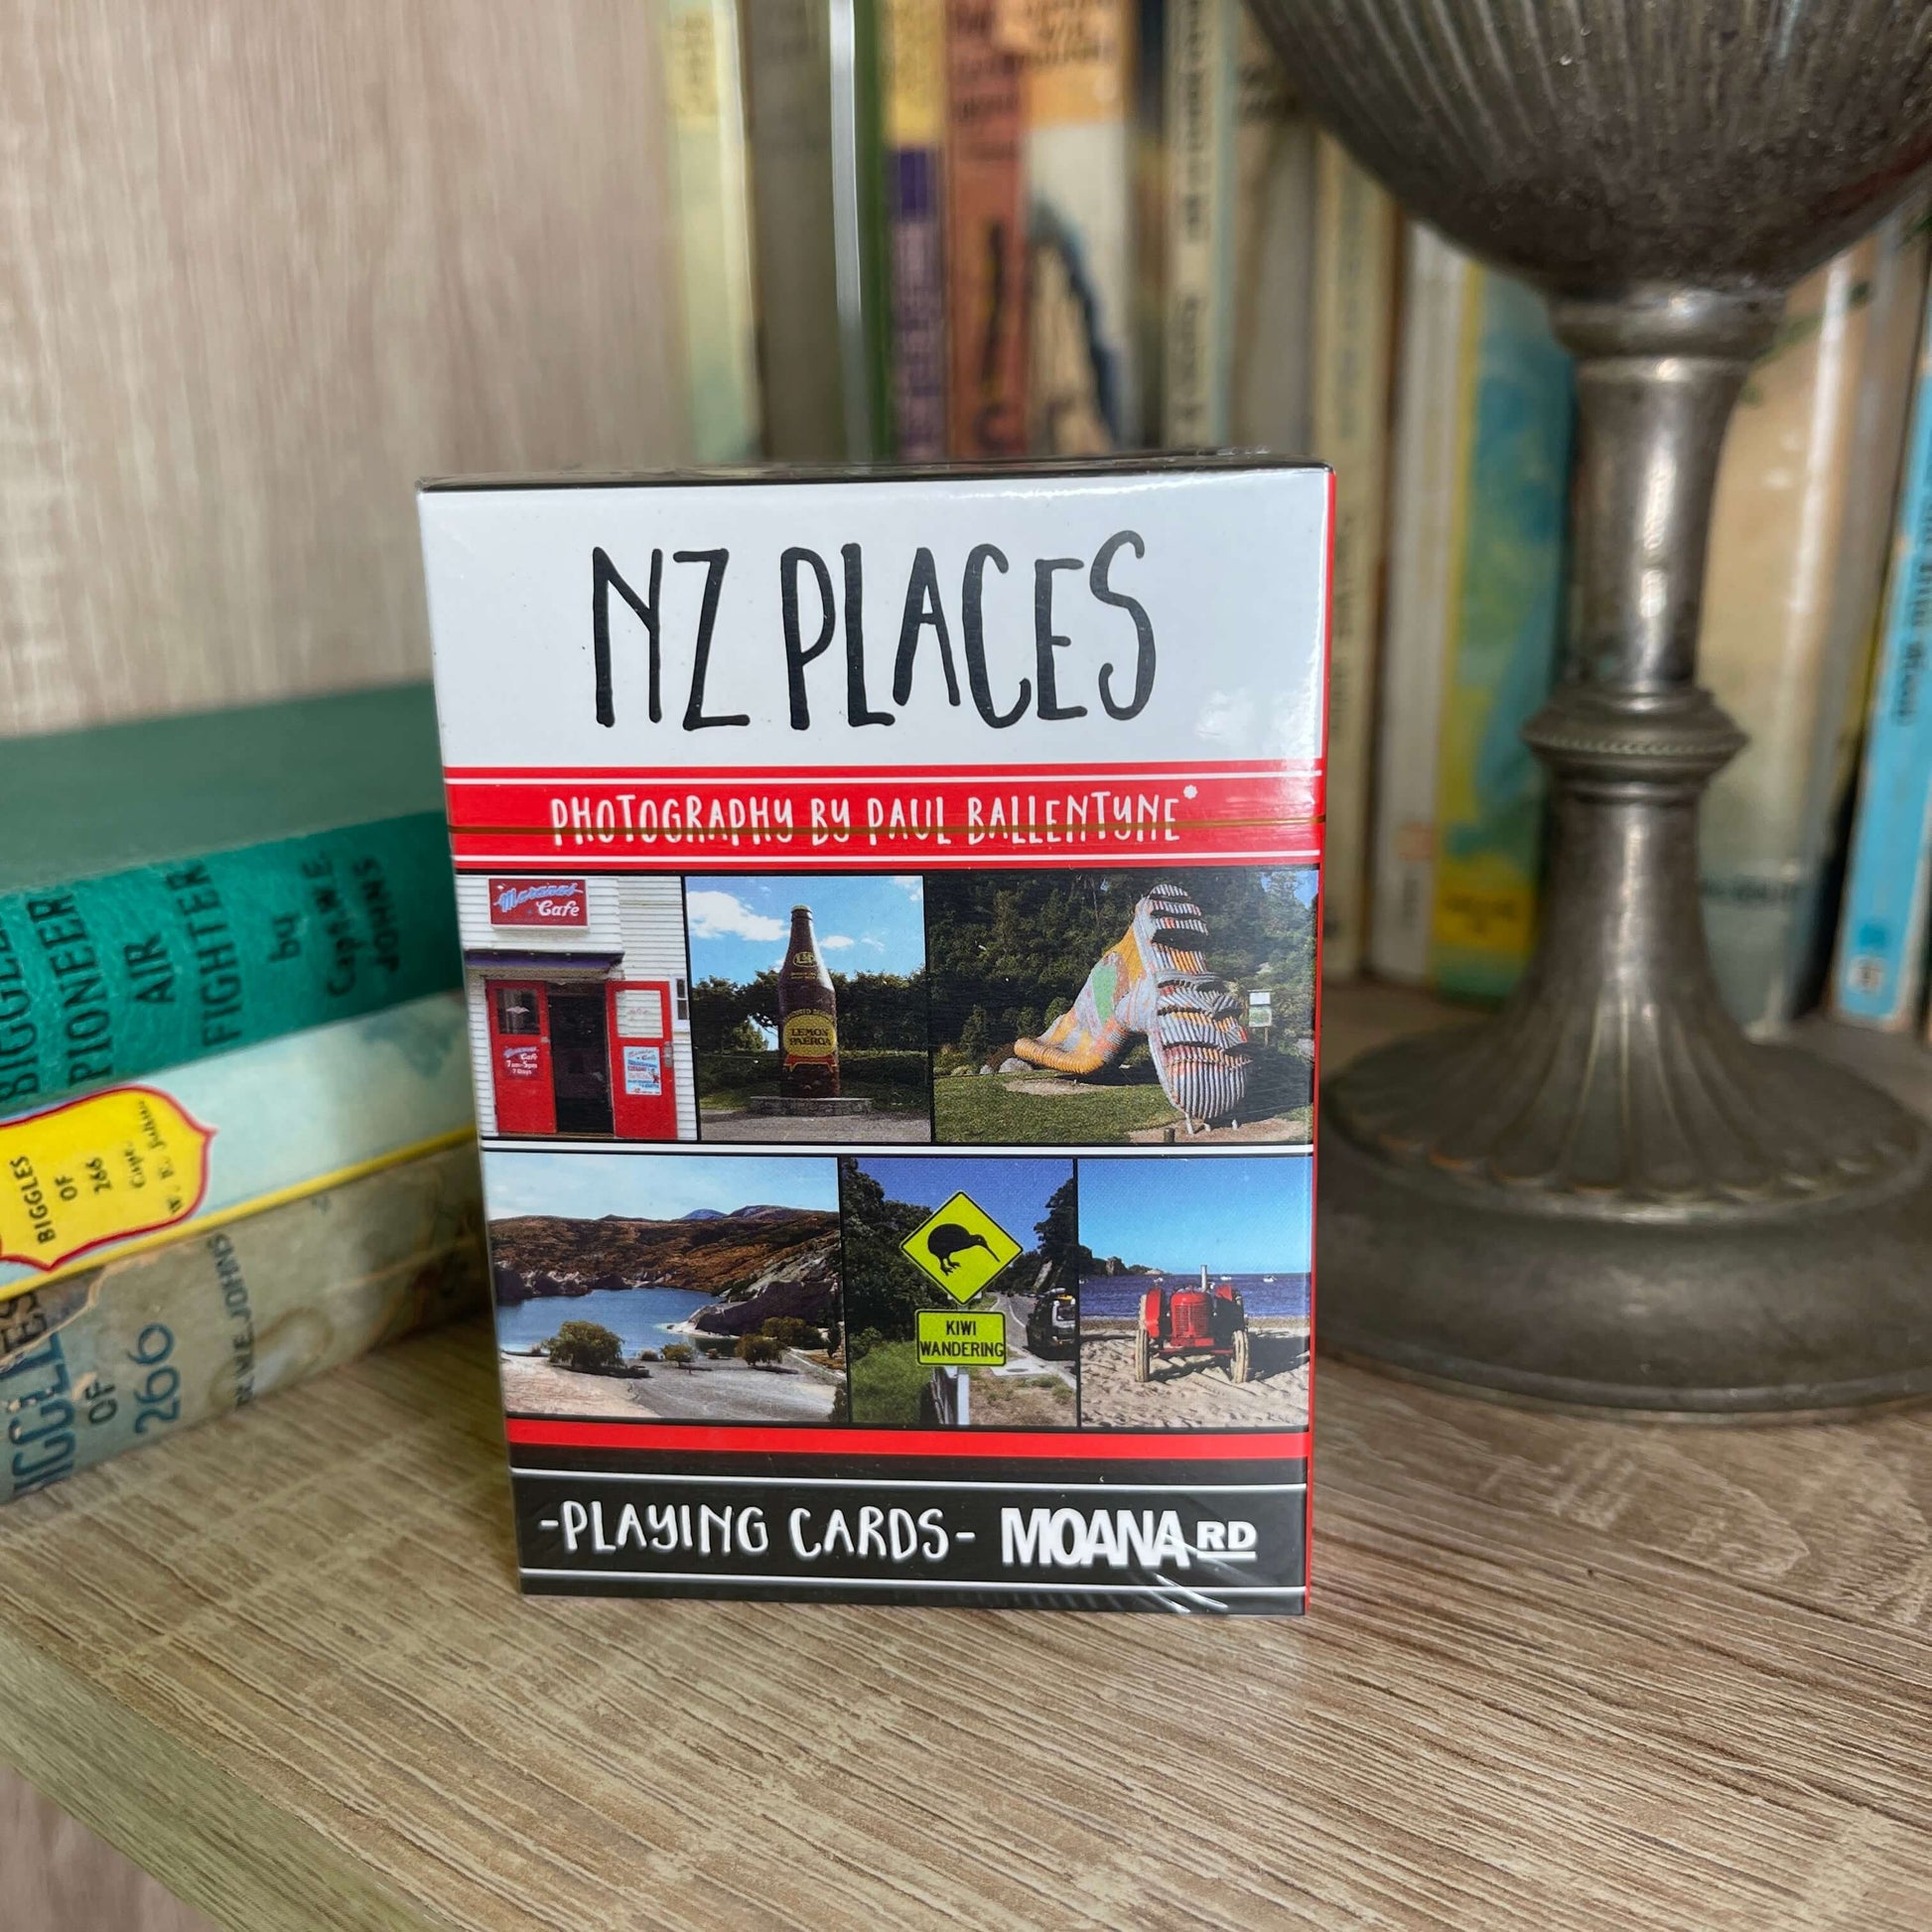 Pack of playing cards featuring NZ places sitting on a book shelf.